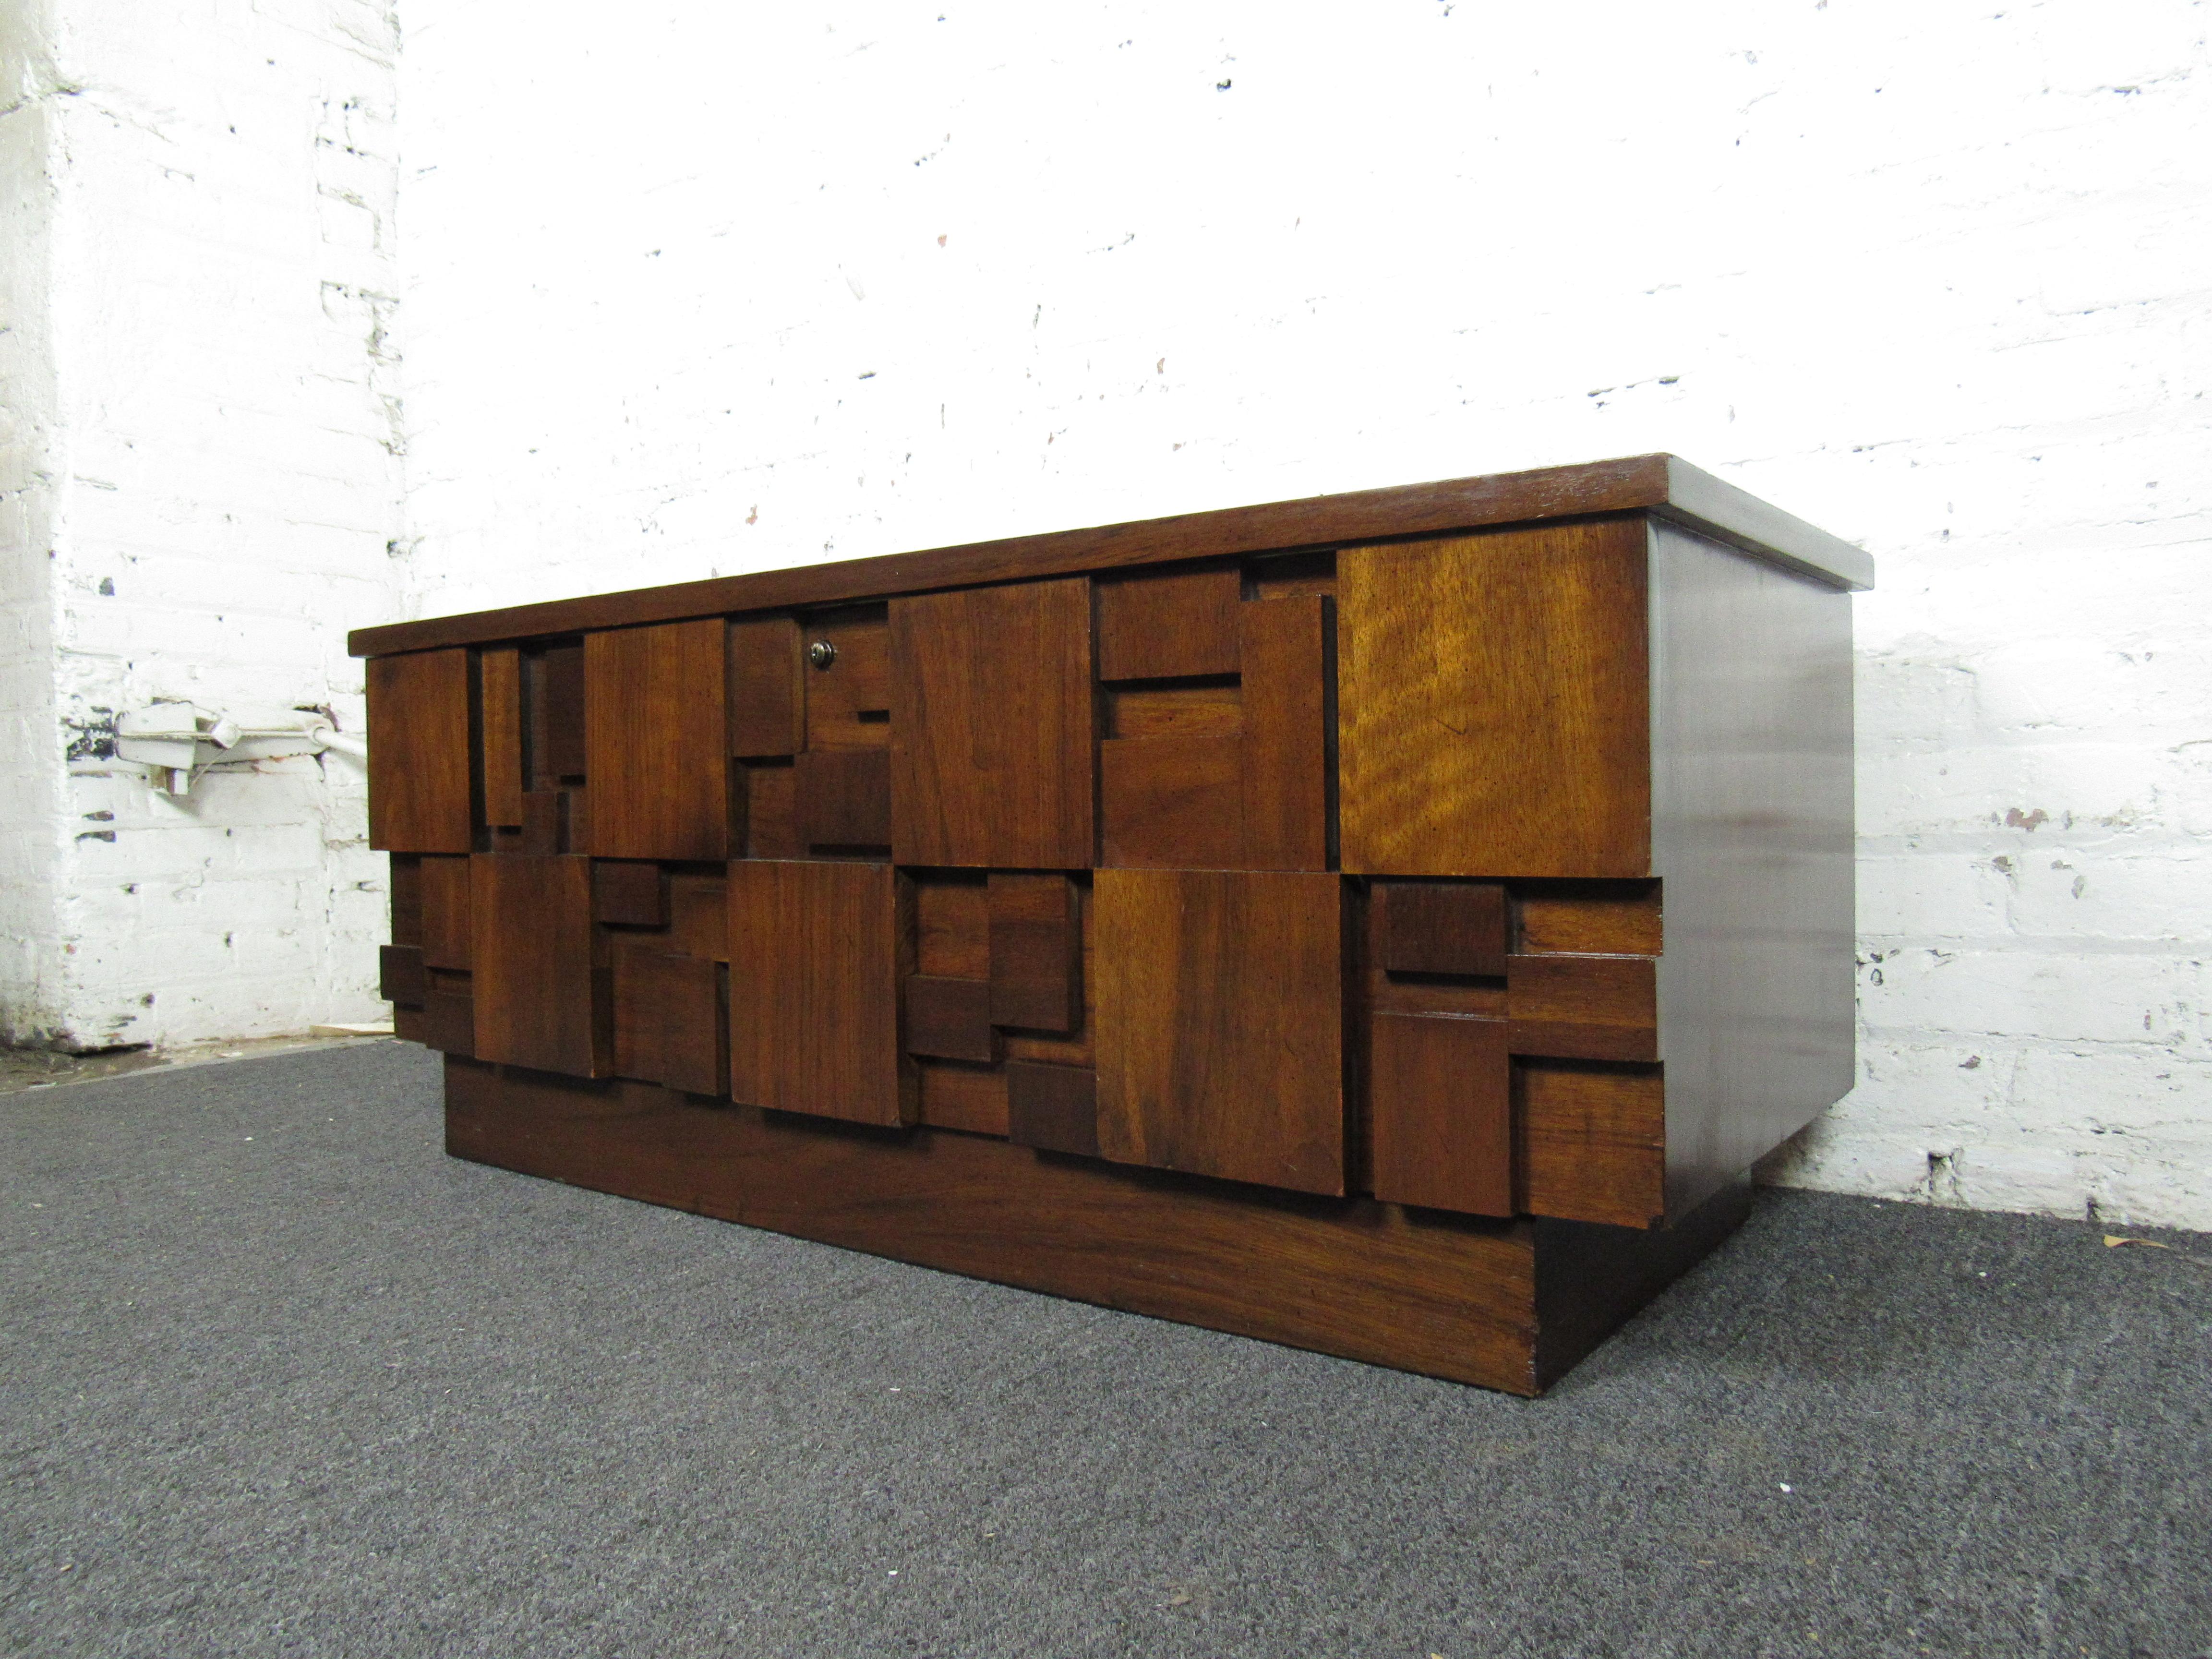 Beautiful Mid-Century Modern trunk by Lane Furniture, combining a rich walnut woodgrain with sturdy craftsmanship and made in USA quality. A fleece-lined shelf and roomy spacious offer organization and storage. Please confirm item location with